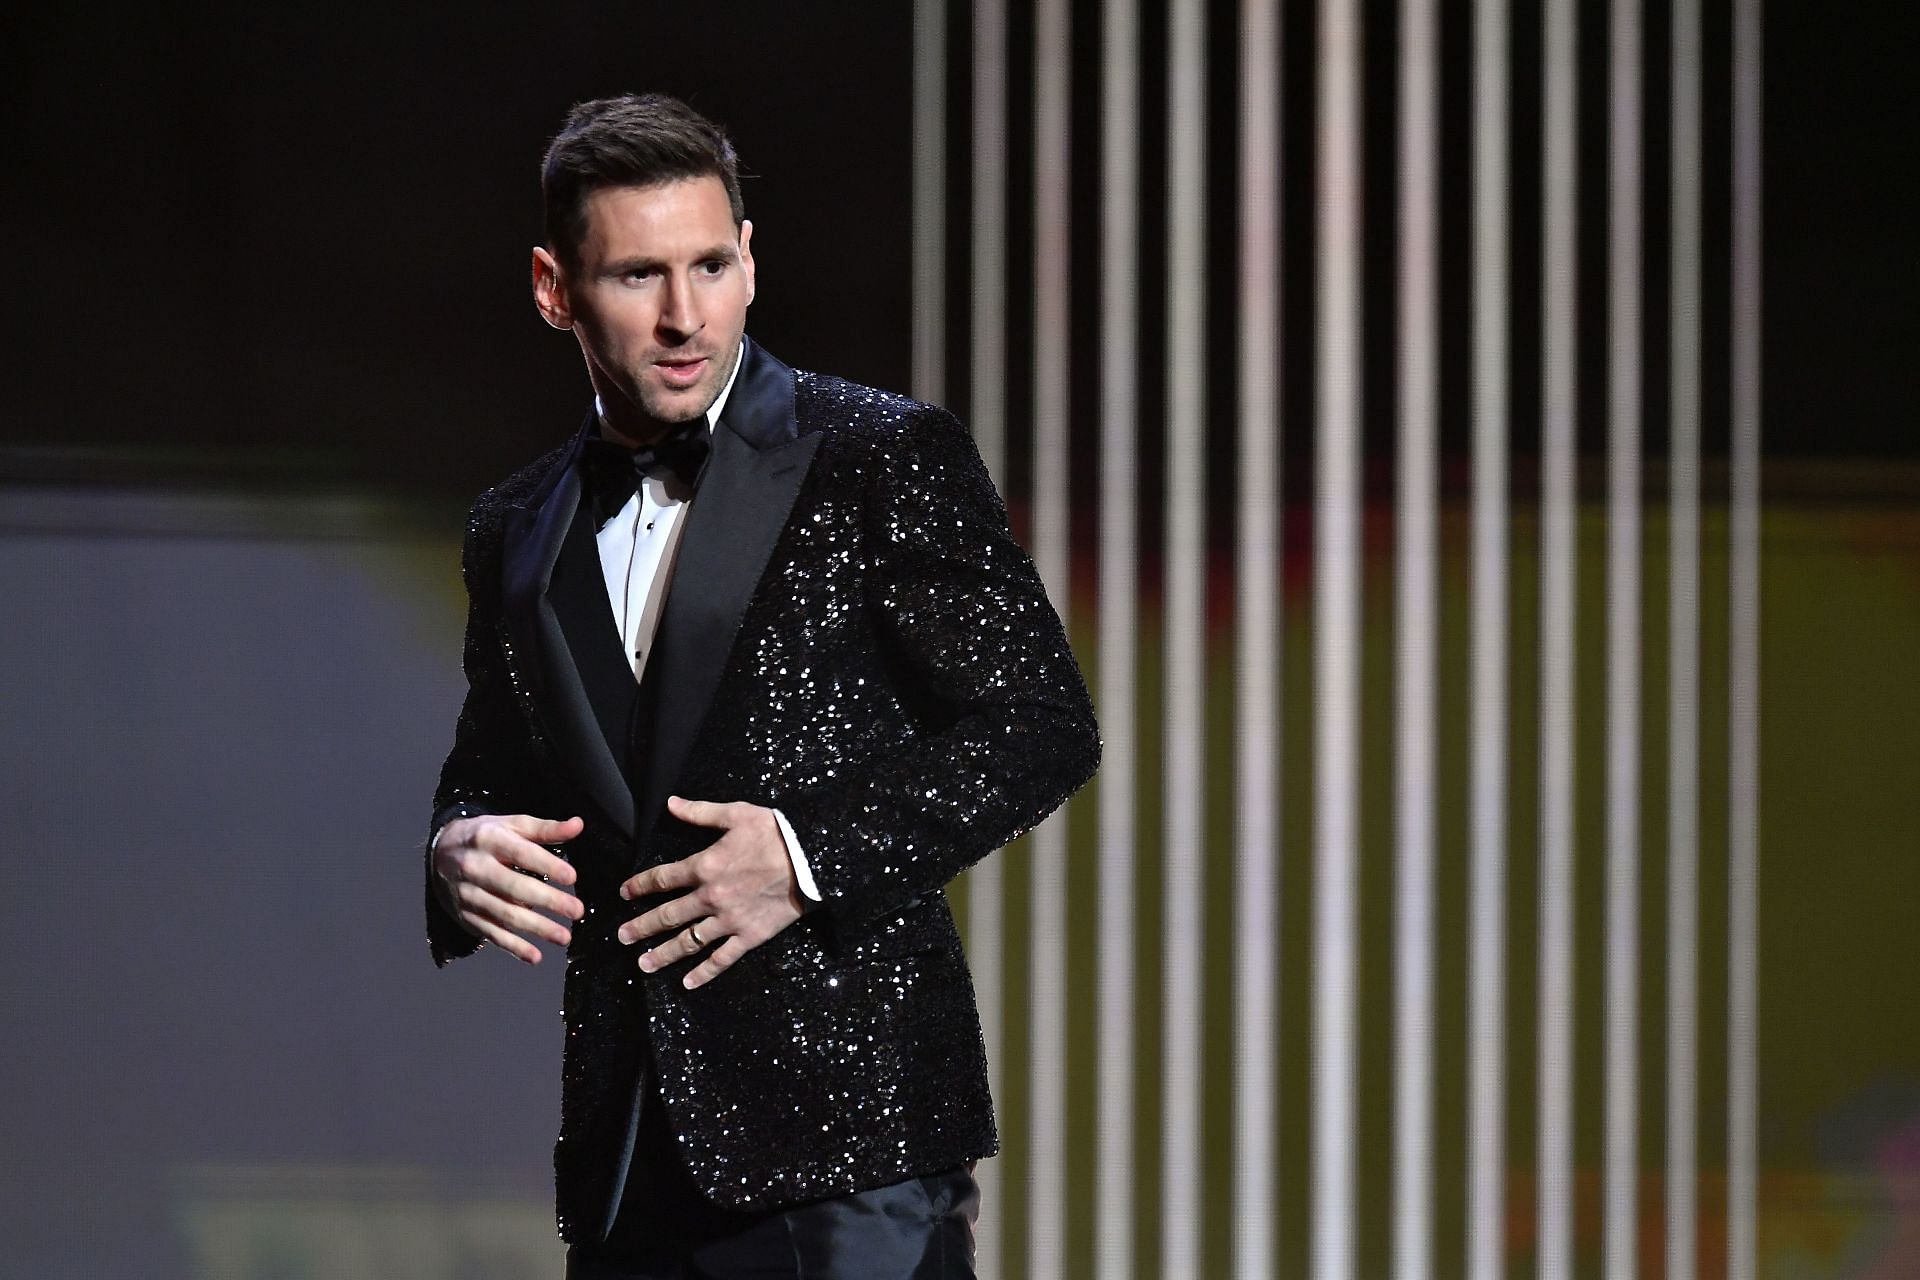 Robert Lewandowski was moved by Lionel Messi&#039;s speech at this year&#039;s Ballon d&#039;Or ceremony.